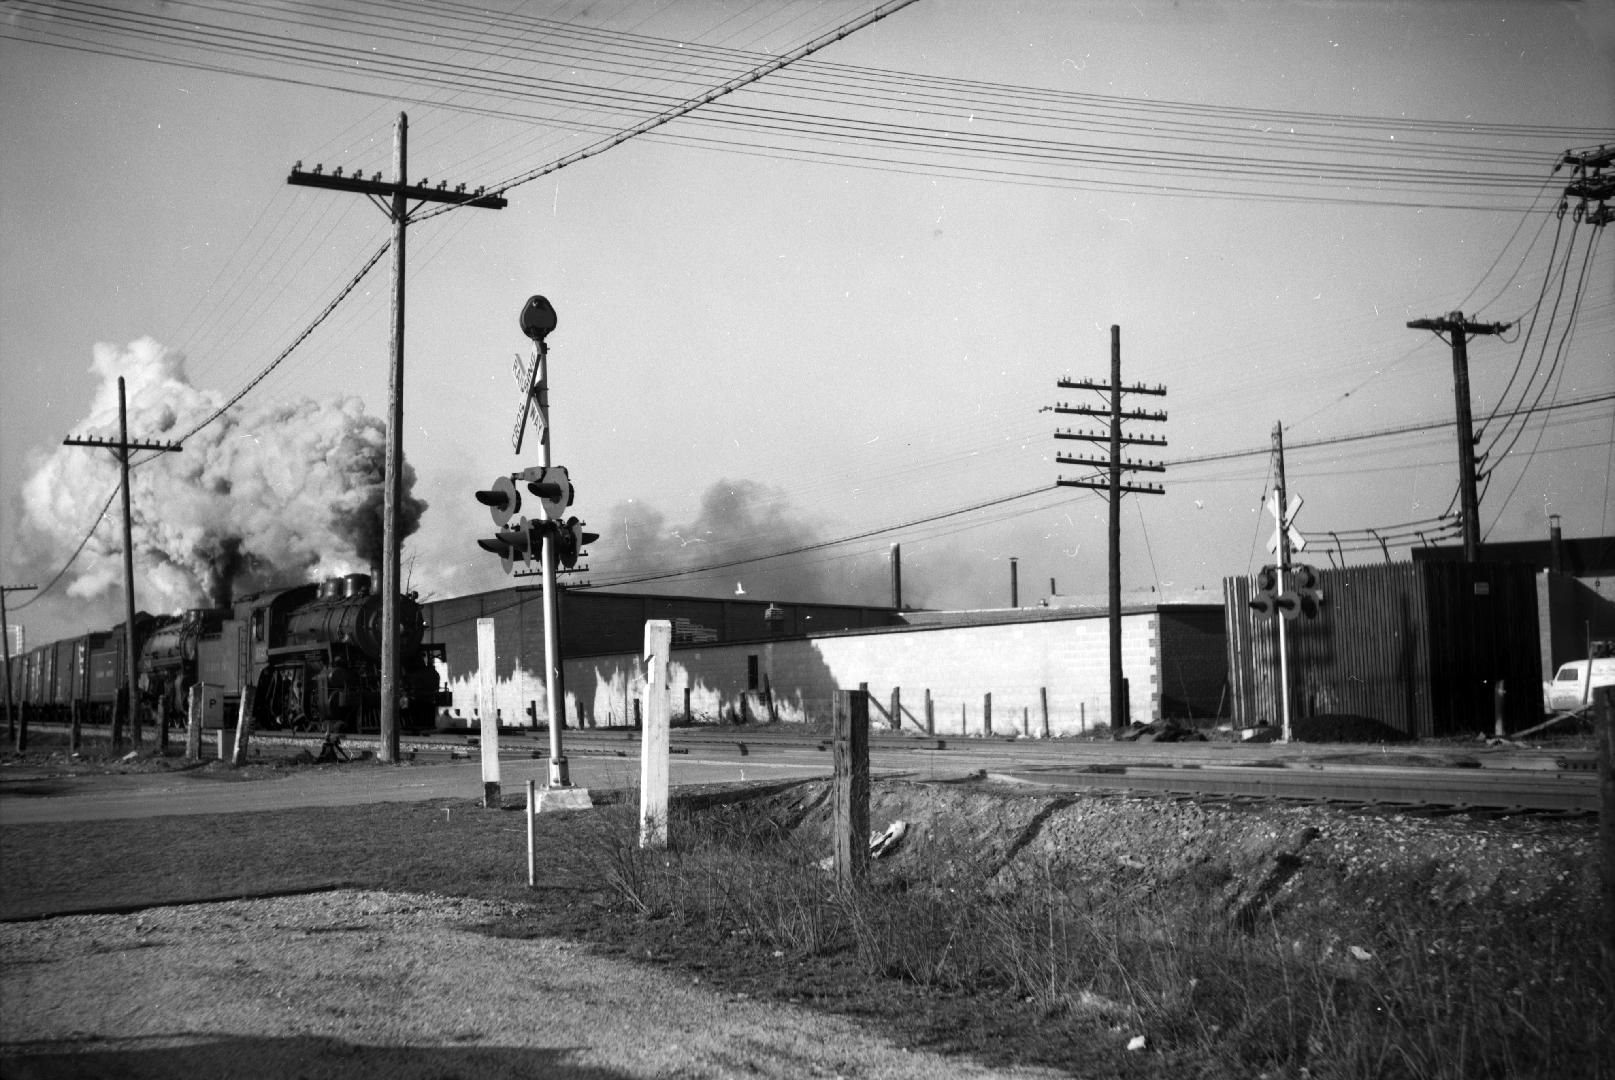 Image shows a train passing at the CP rail crossing.